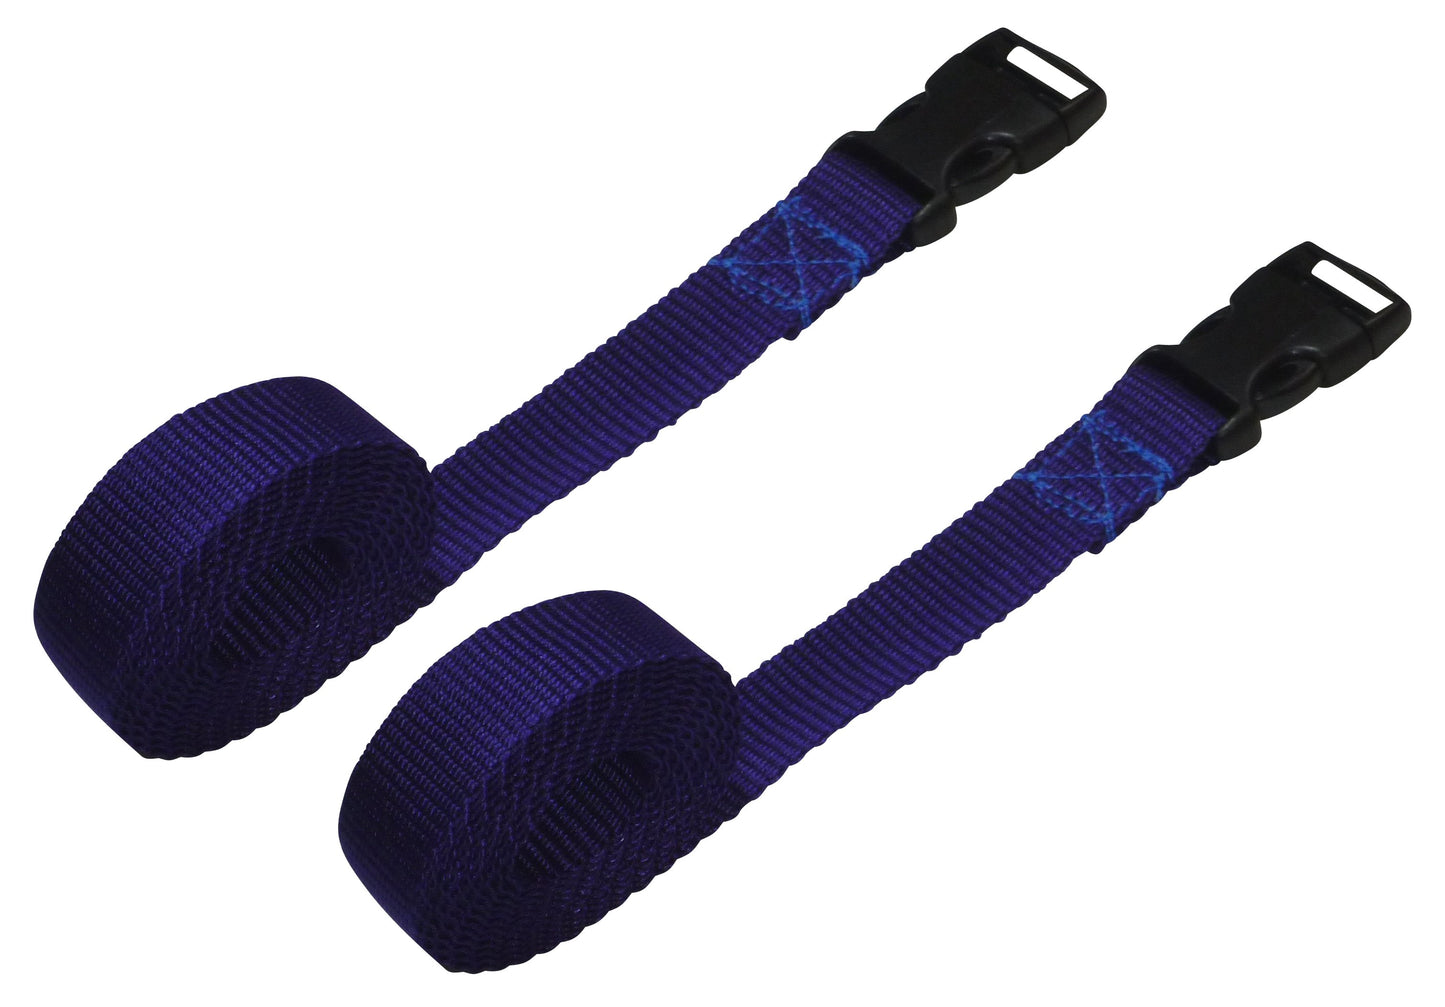 Benristraps 25mm Webbing Strap with Quick Release Buckle (Pair) in purple